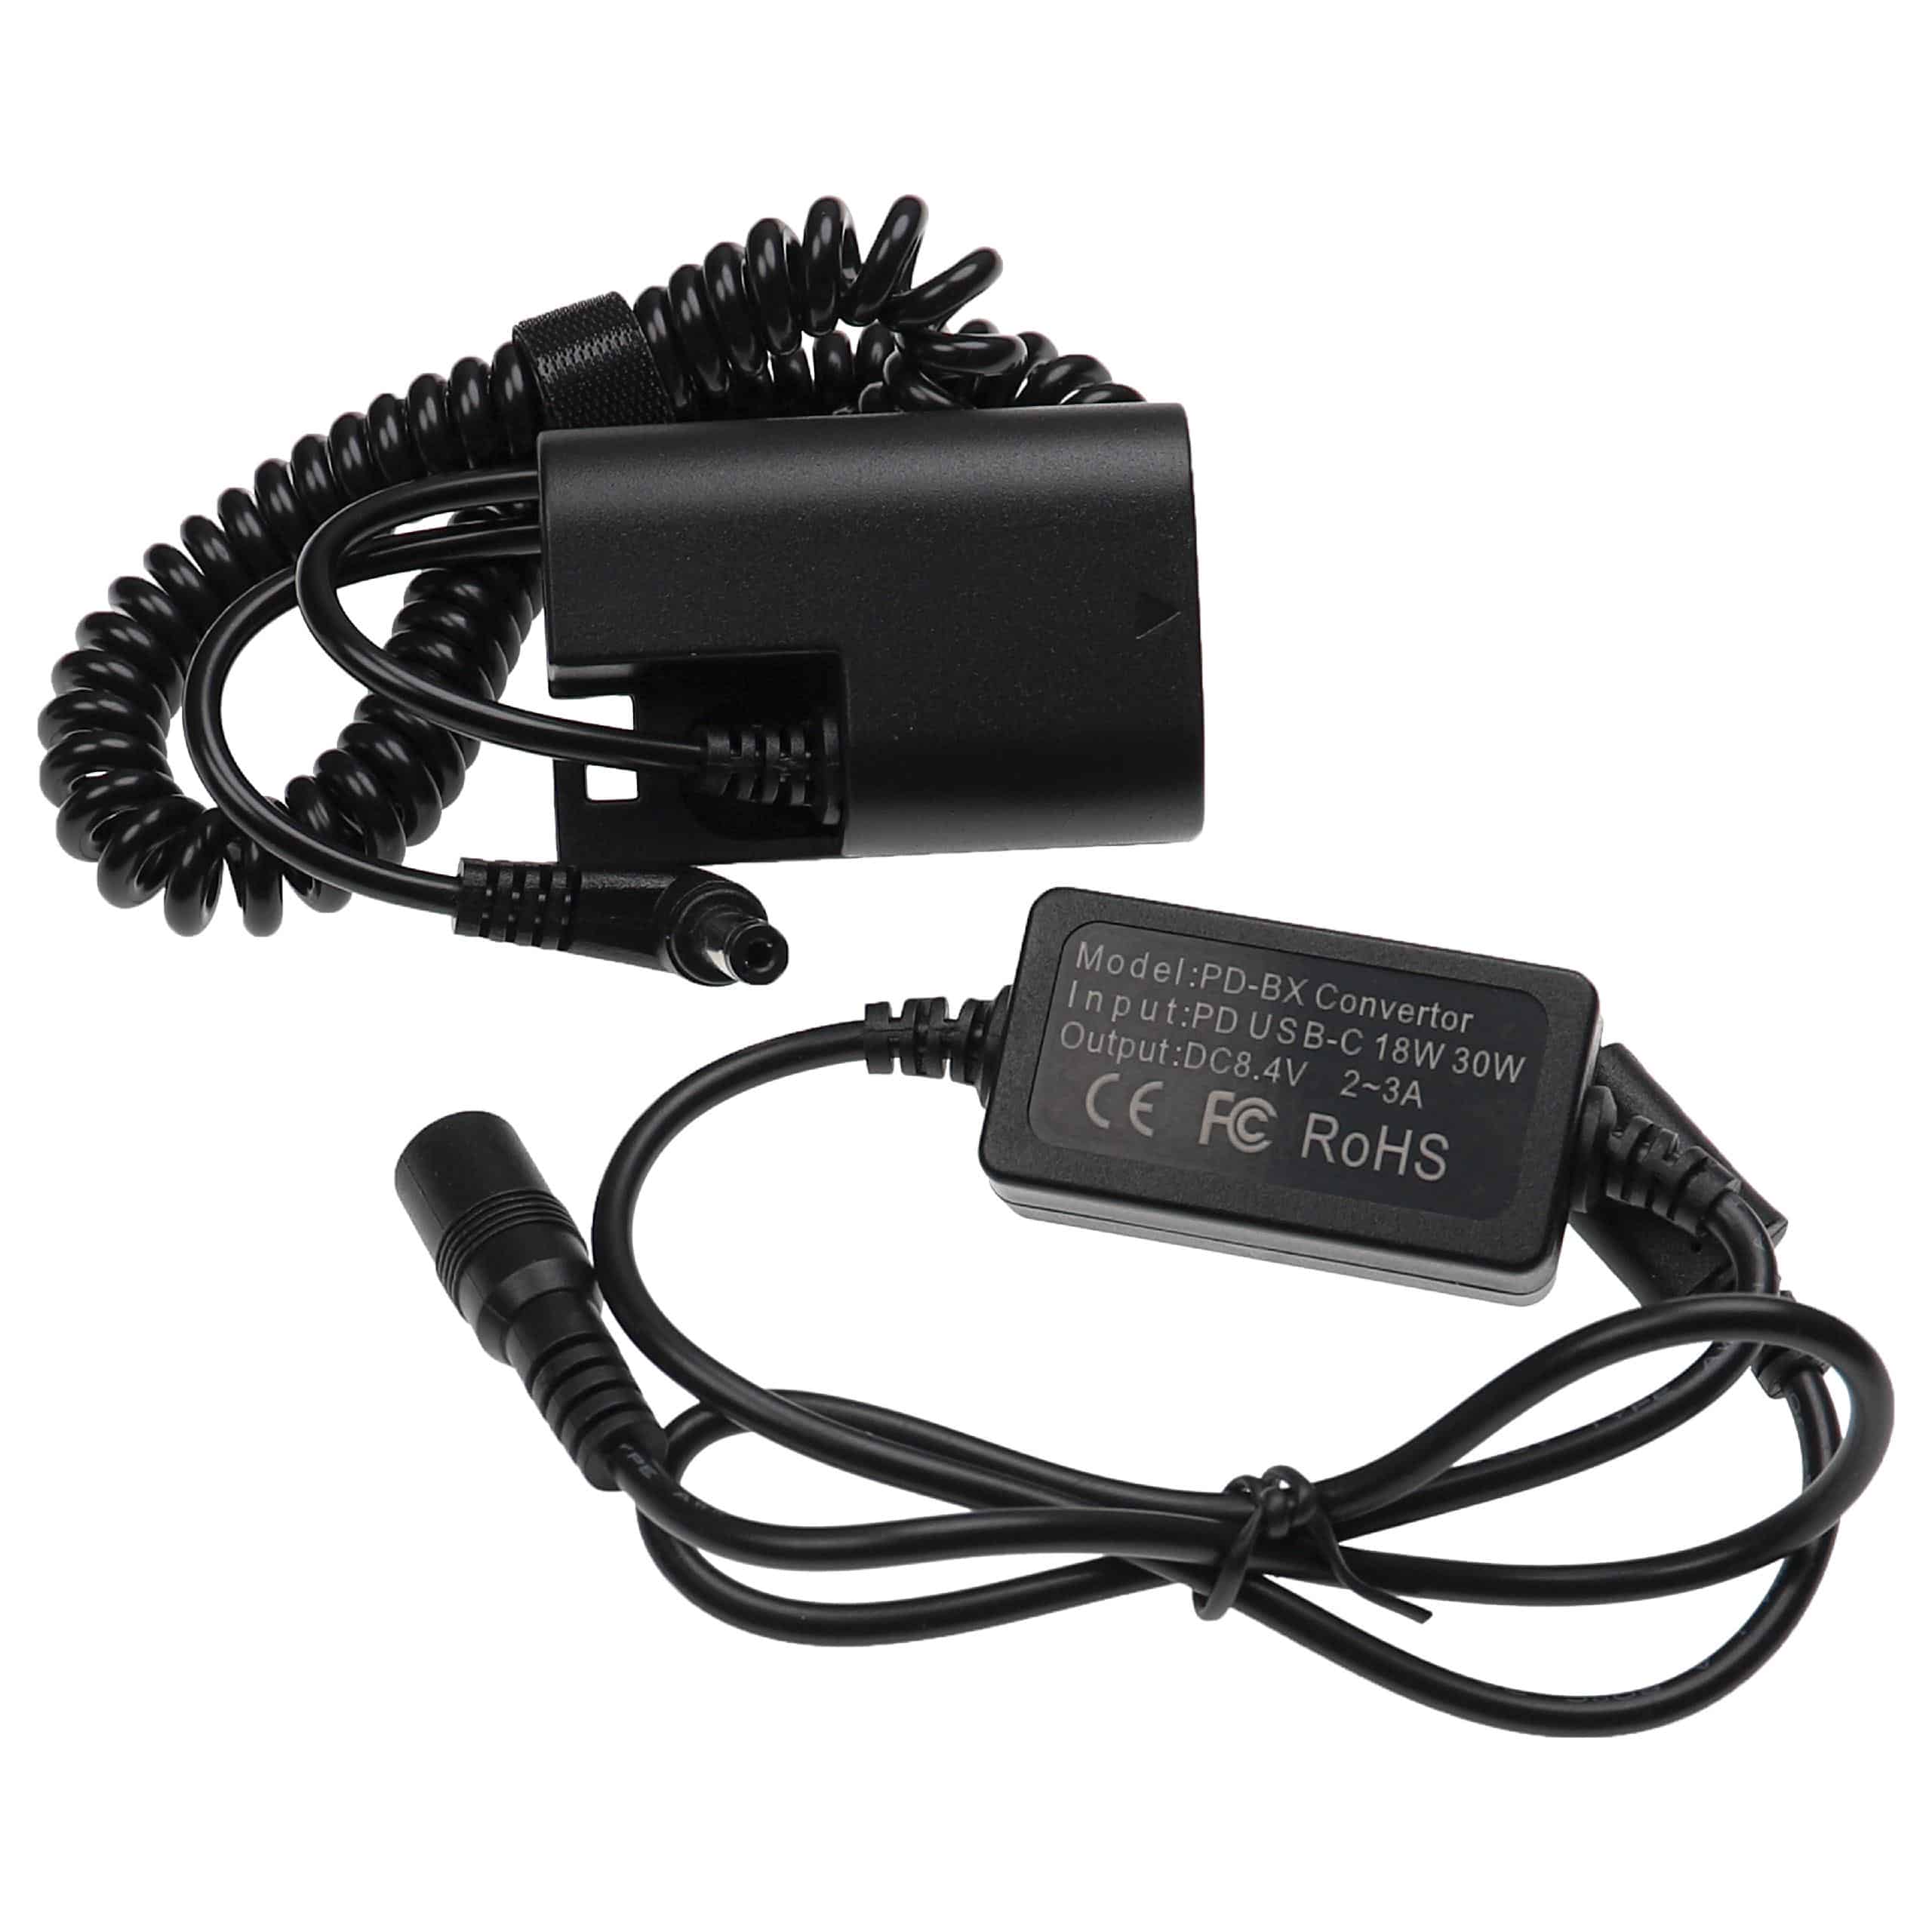 USB Power Supply replaces ACK-E6 for Camera + DC Coupler Fully Decoded as Canon DR-E6 - 2 m, 8.4 V 3.0 A